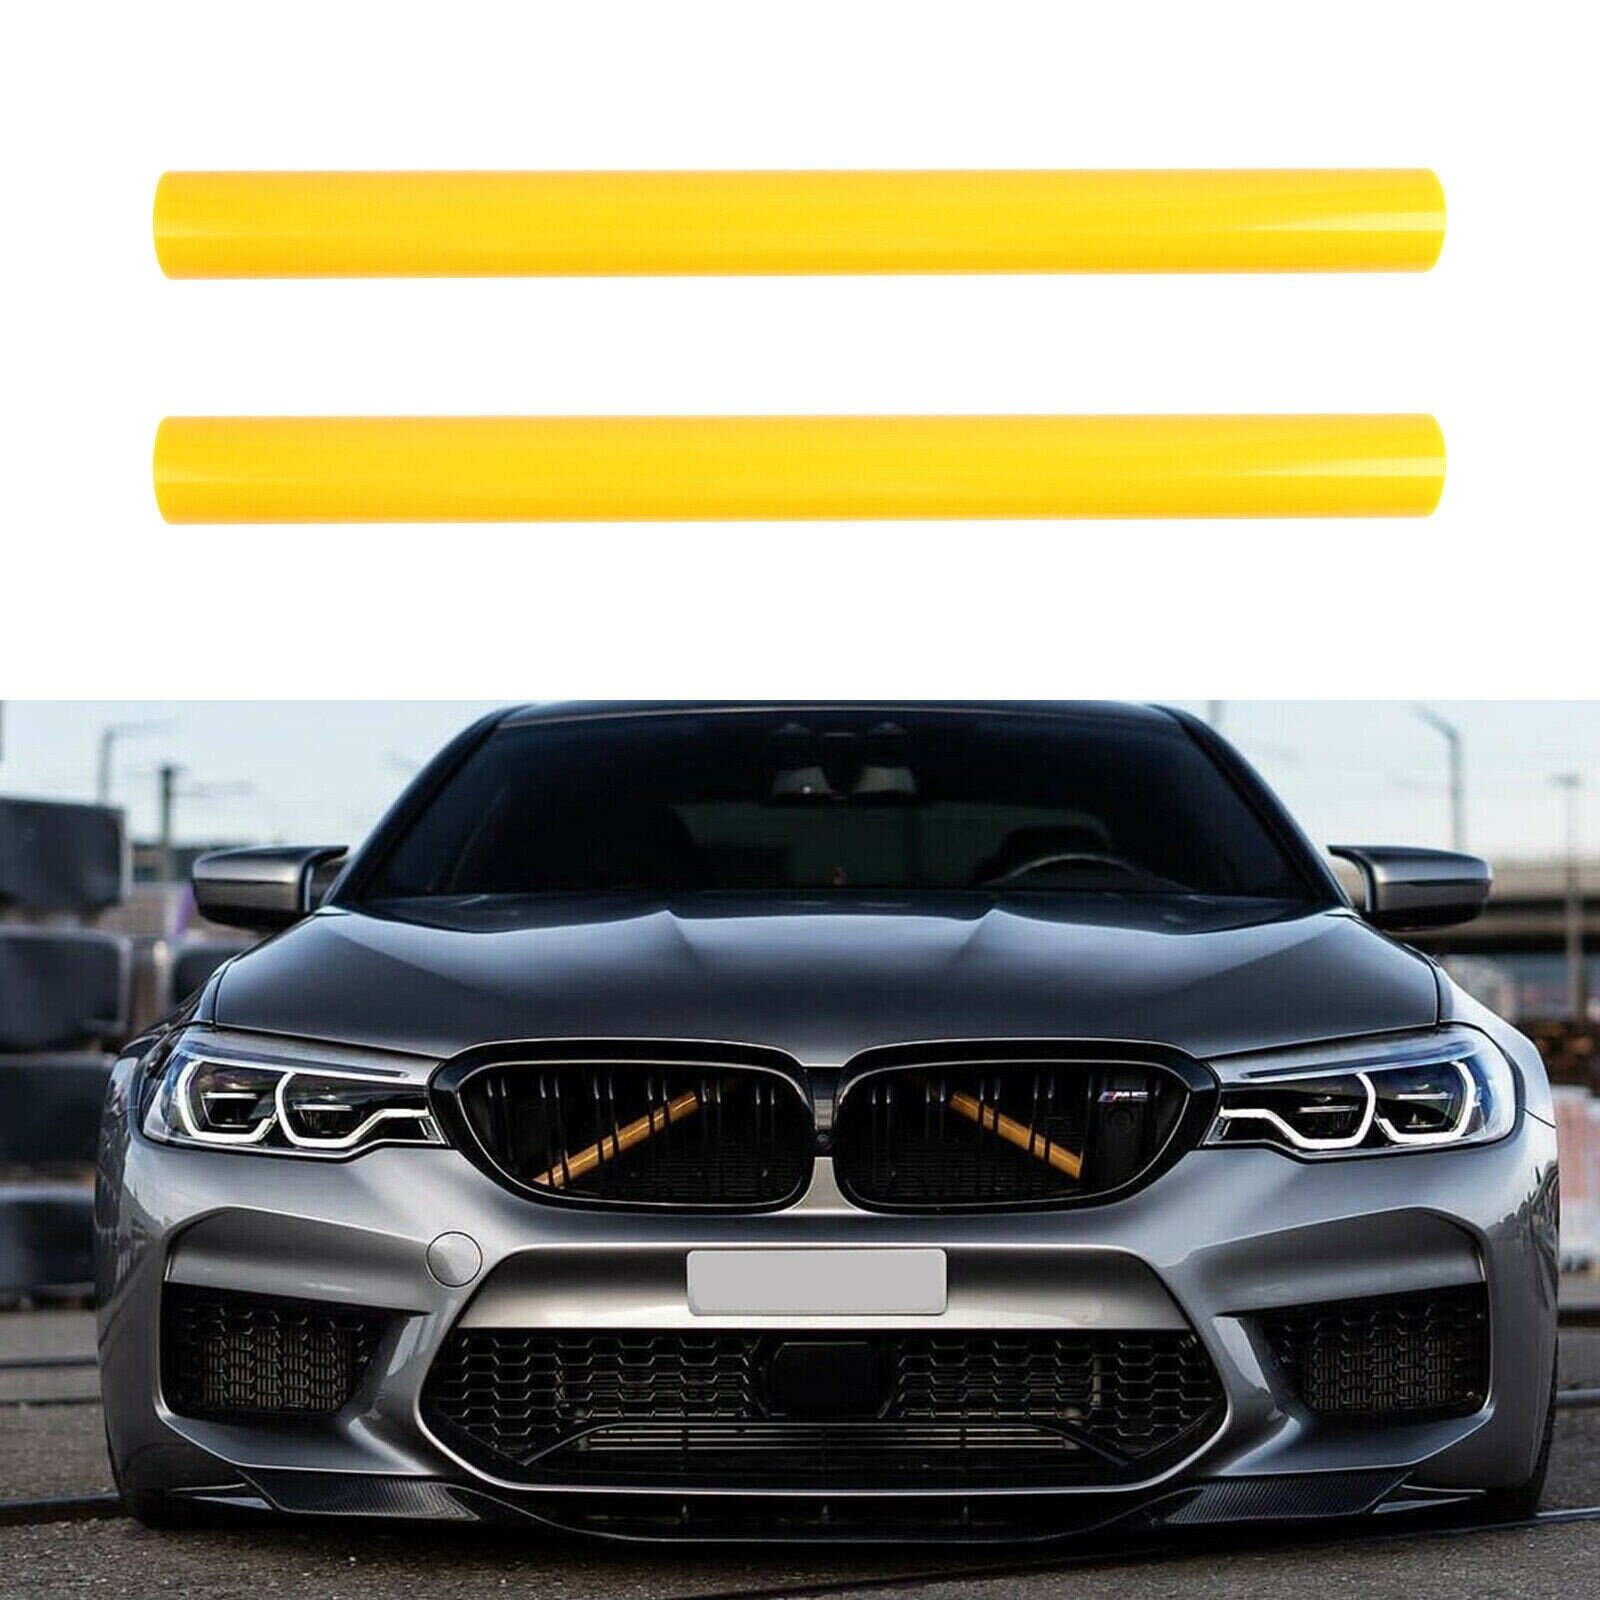 BMW Yellow Front Grille Trim Strips Pipe V Brace For BMW G20,G21,G28,G29 5 & 6 Series